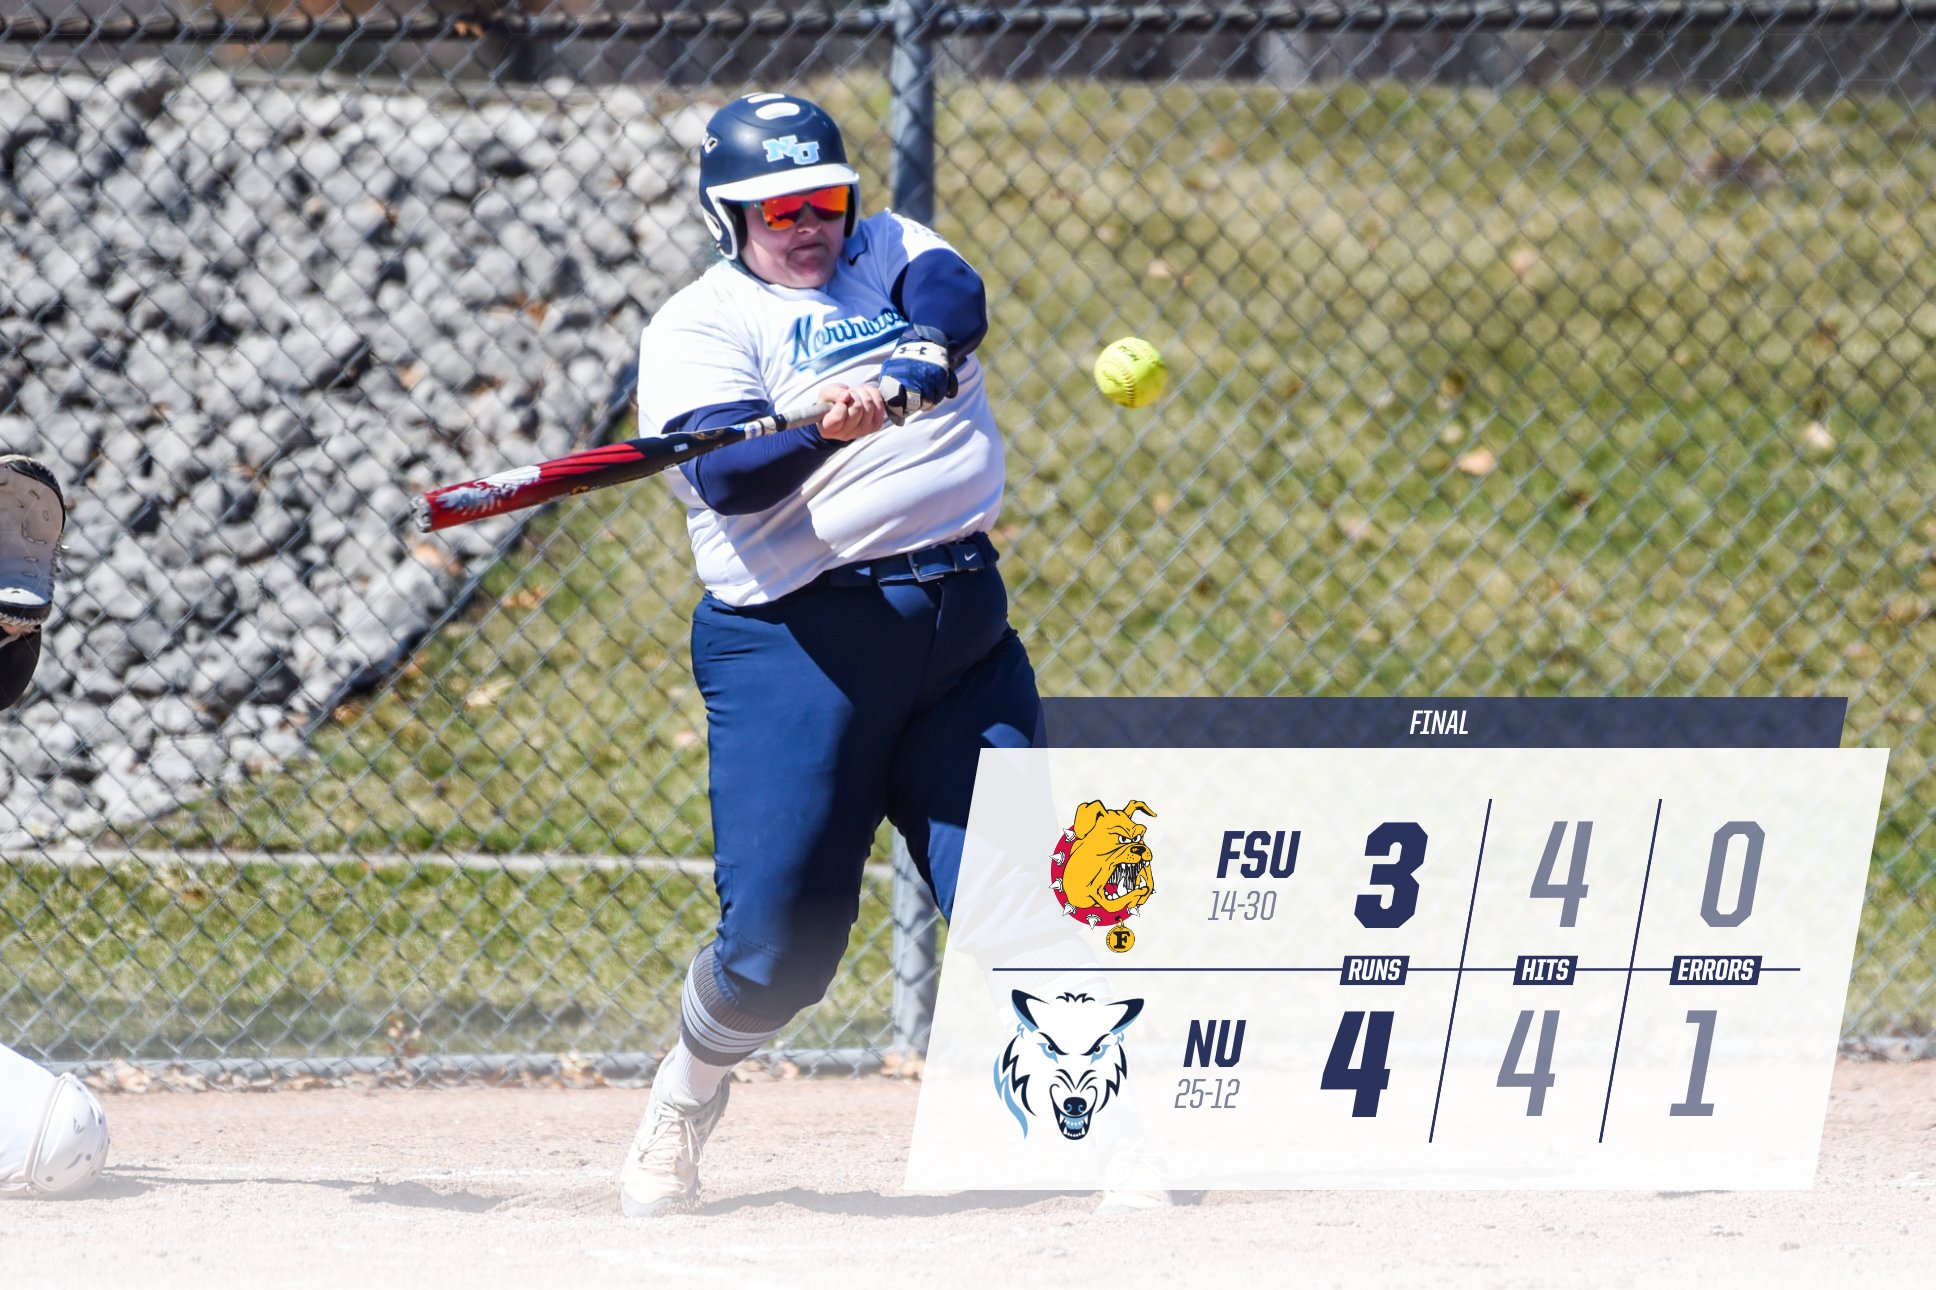 Northwood Softball Wins Versus Ferris State Before Weather Takes Control